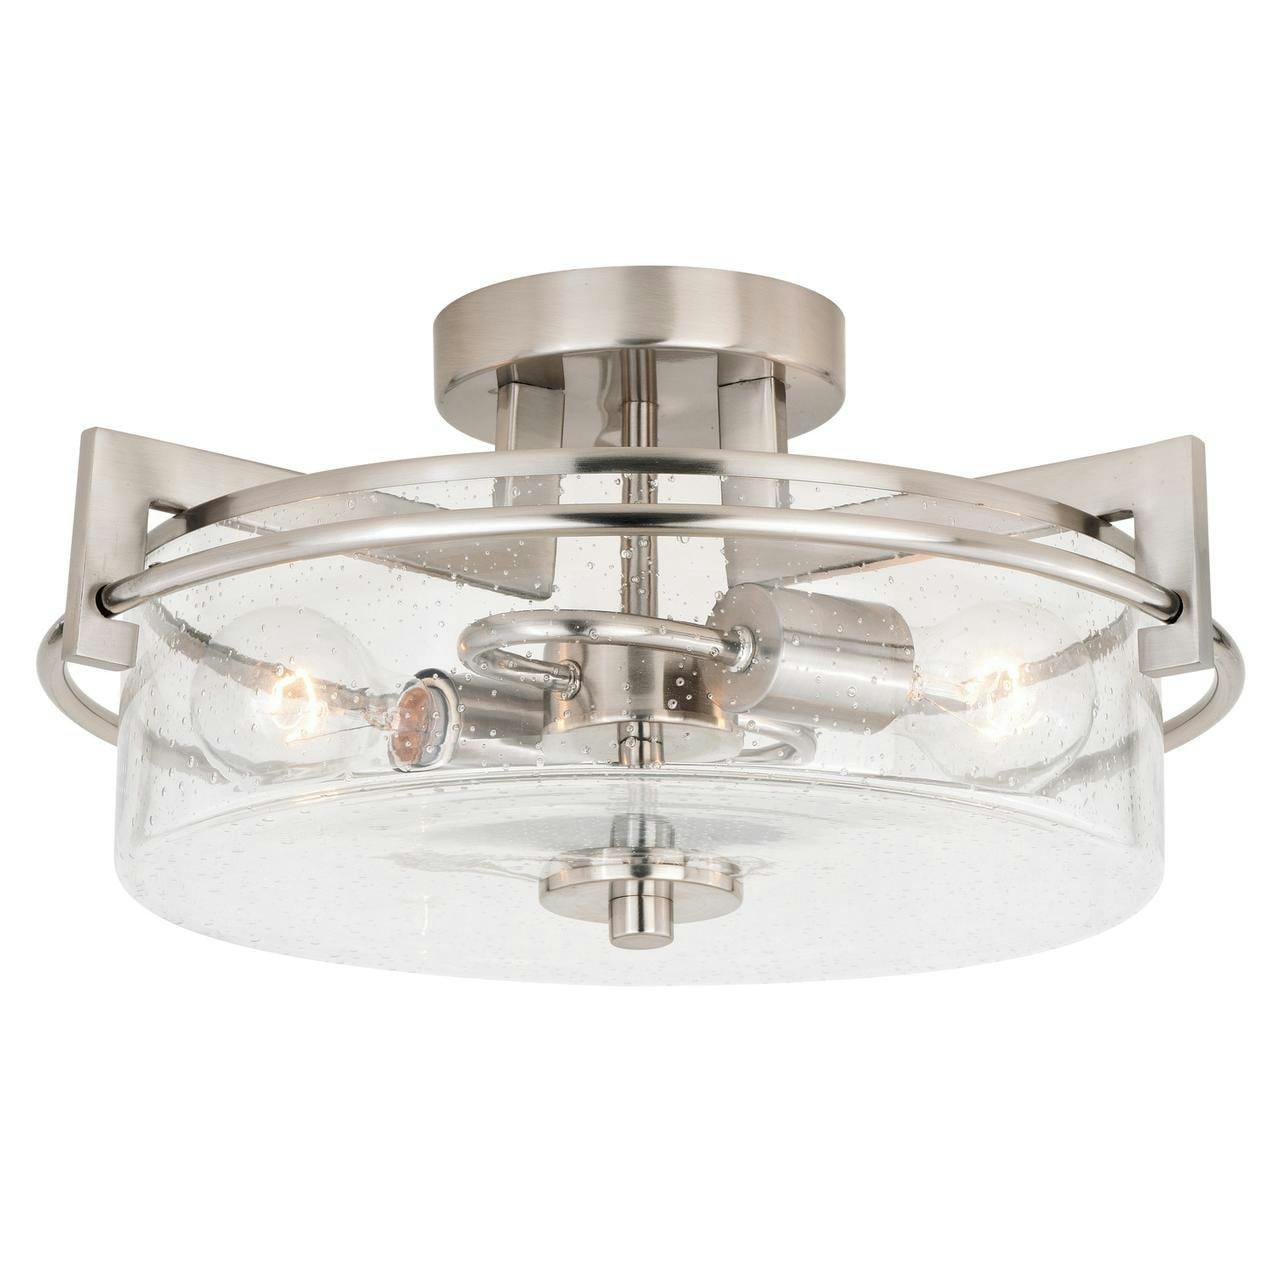 Satin Nickel 15" Drum Ceiling Light with Seeded Glass